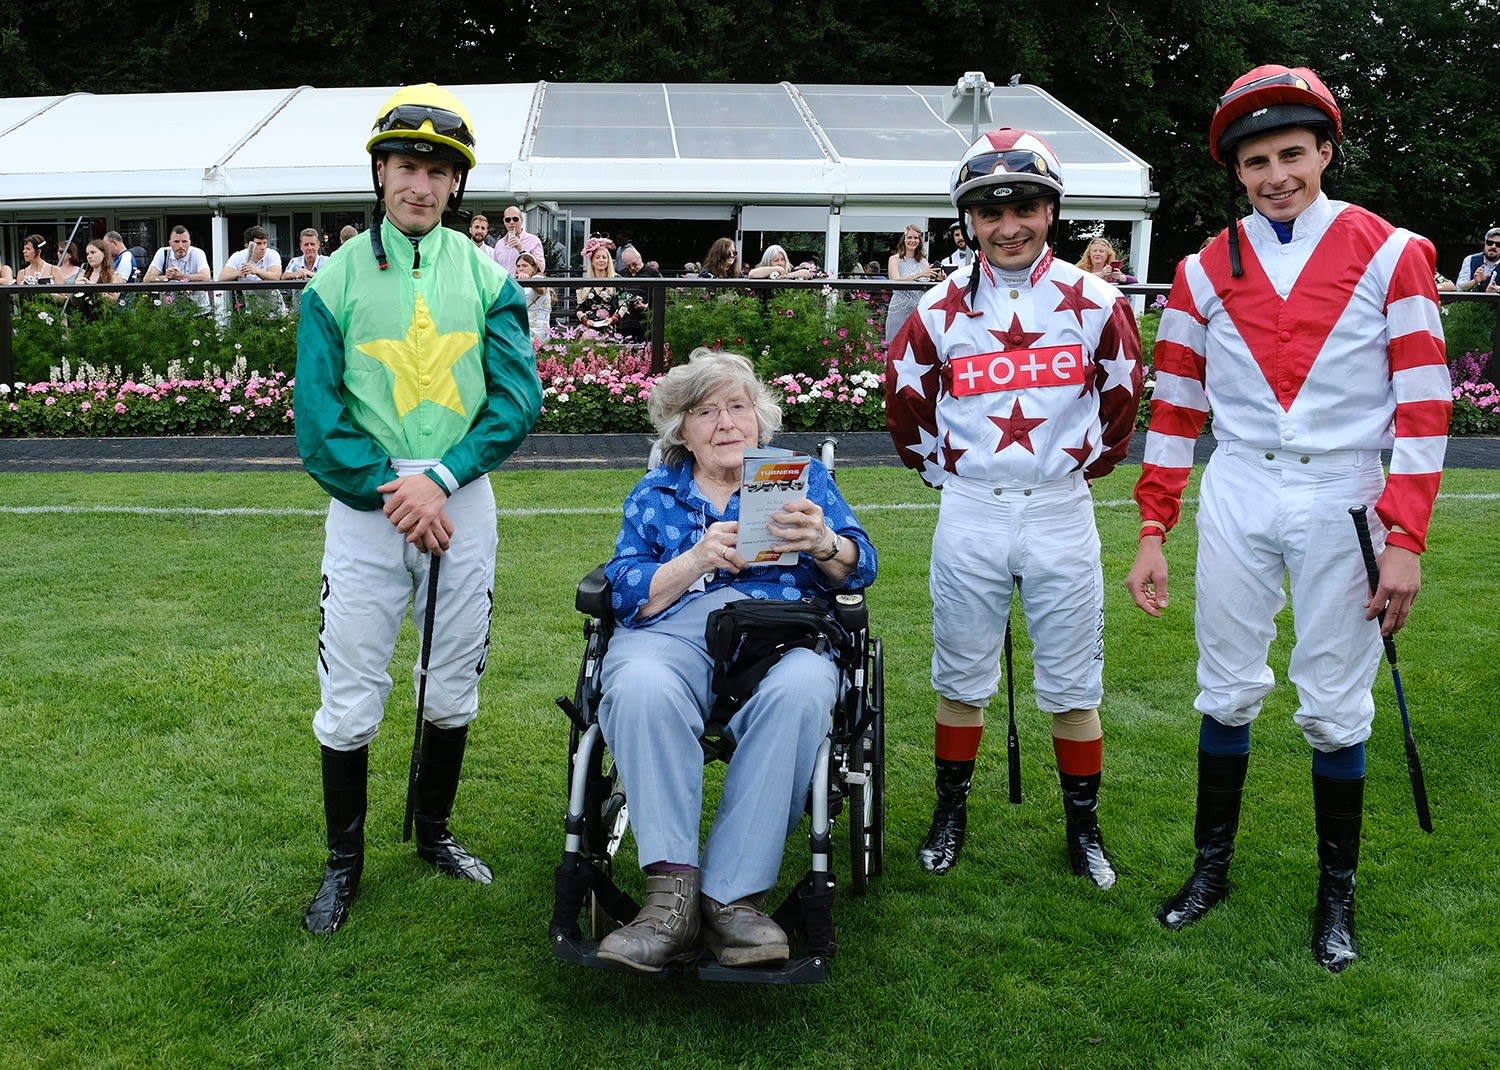  Betty Veal with, left to right, Richard Kingscote, Andrea Atzeni and William Buick